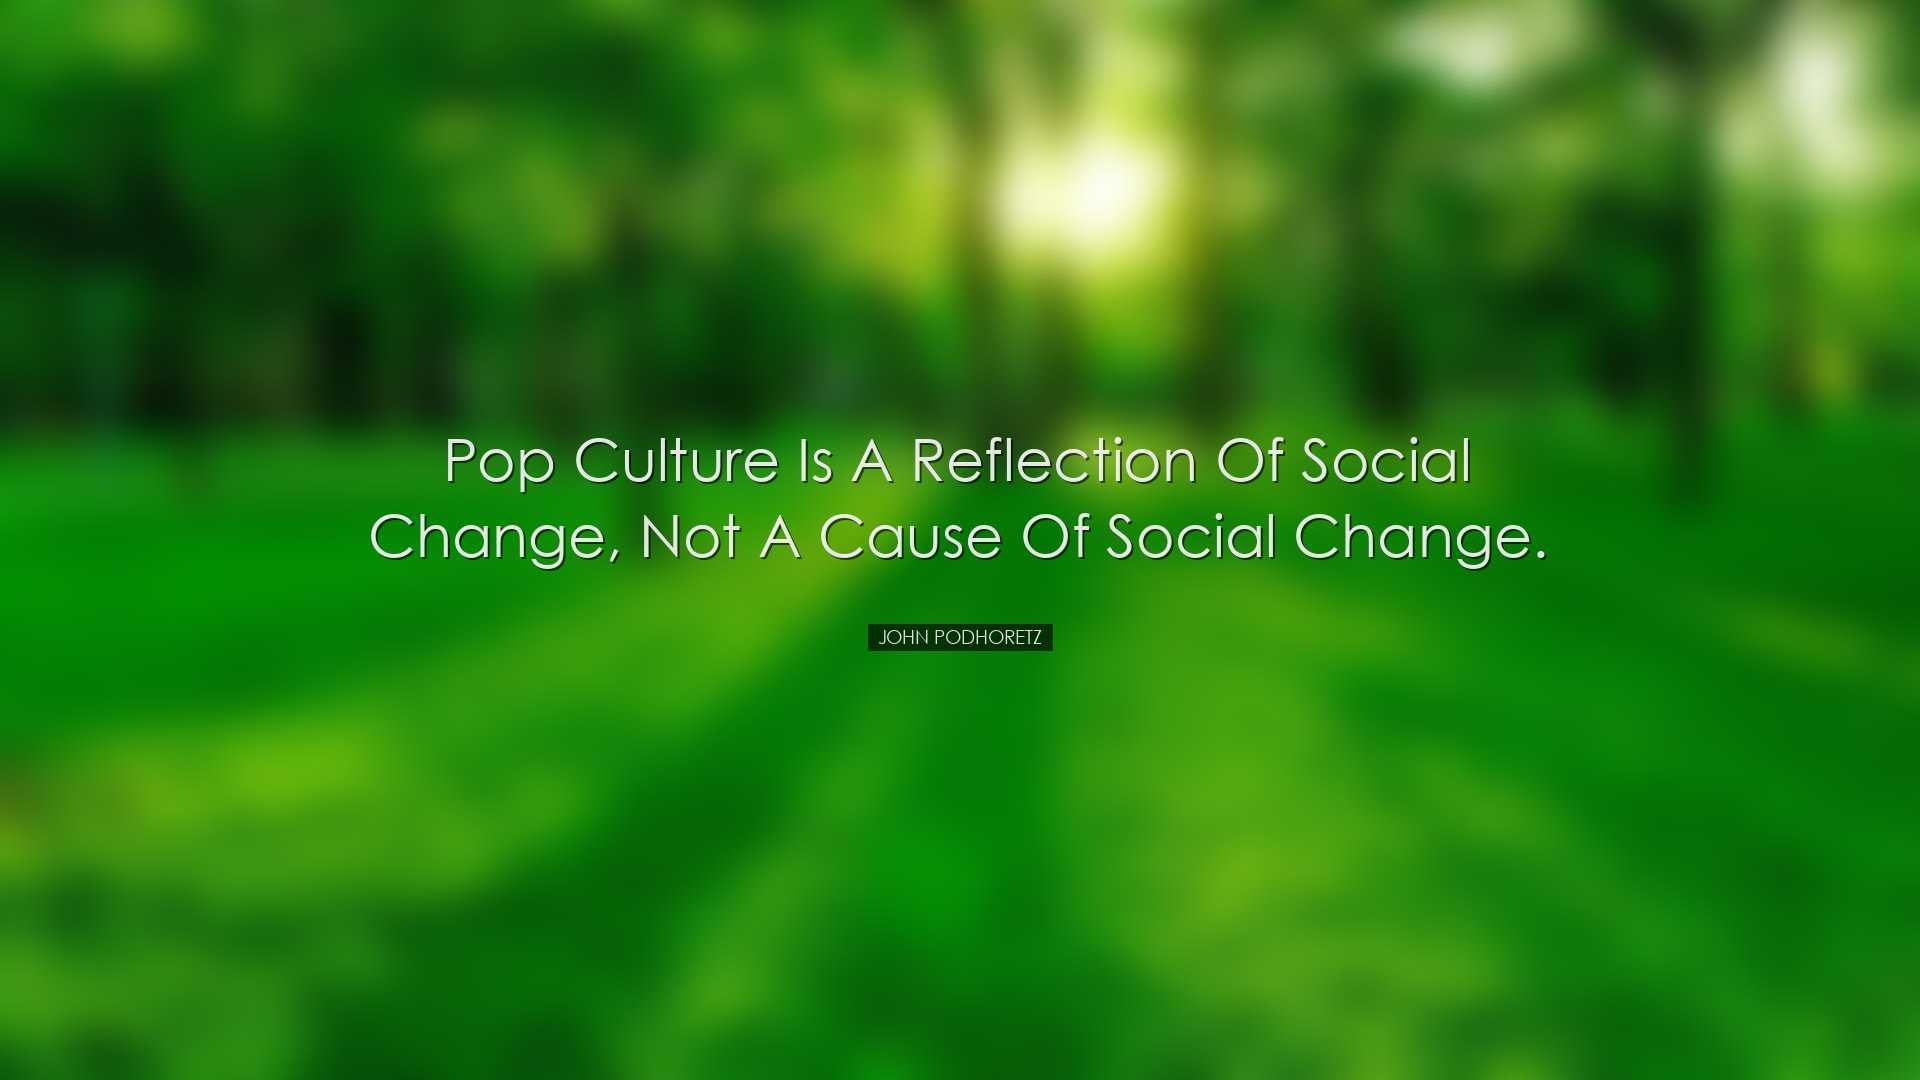 Pop culture is a reflection of social change, not a cause of socia